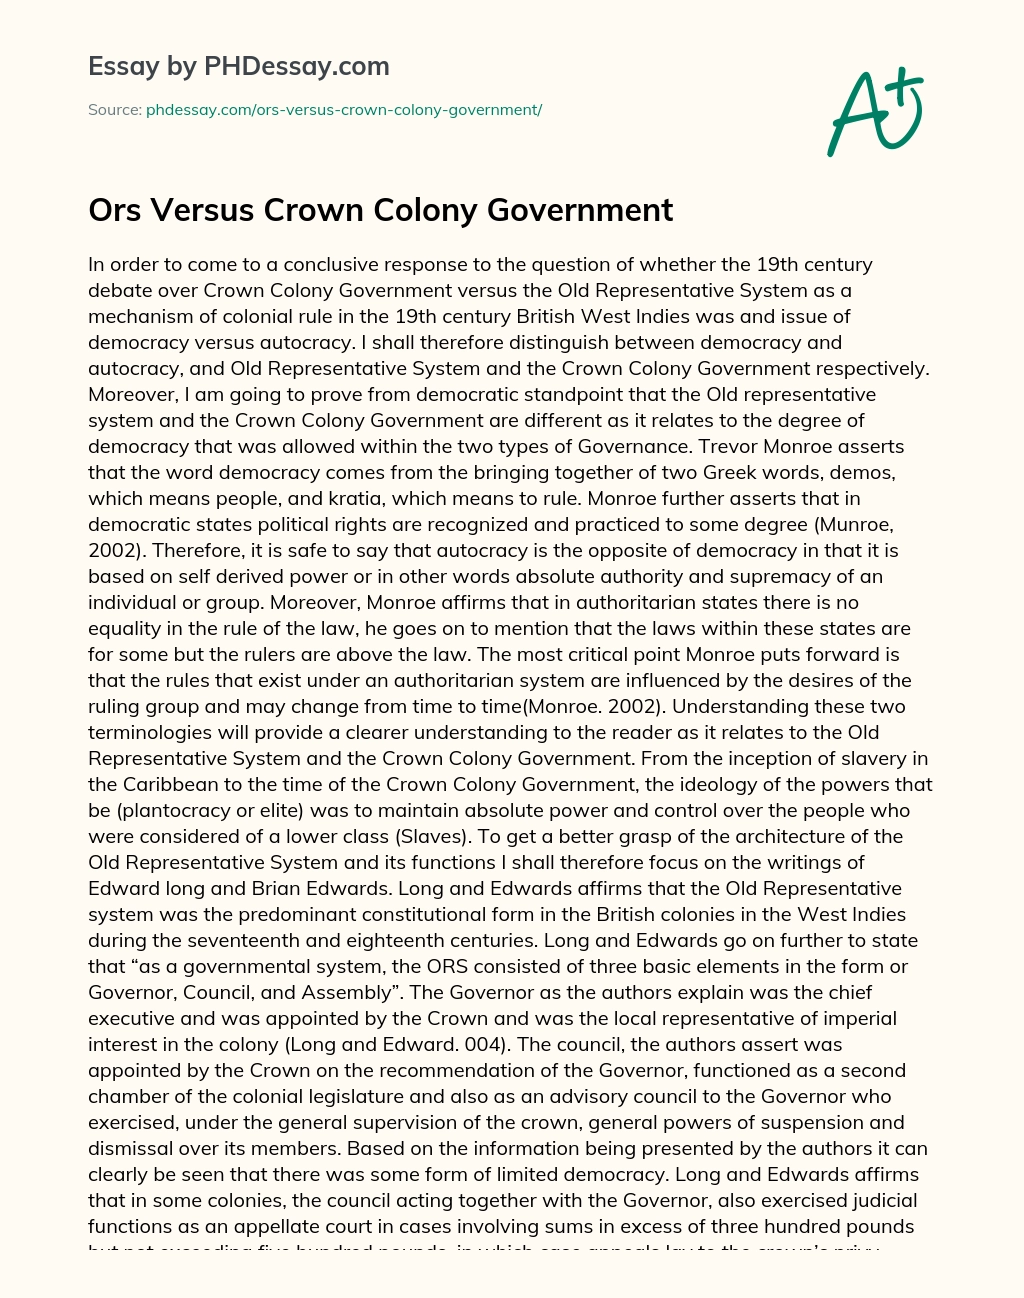 Ors Versus Crown Colony Government essay